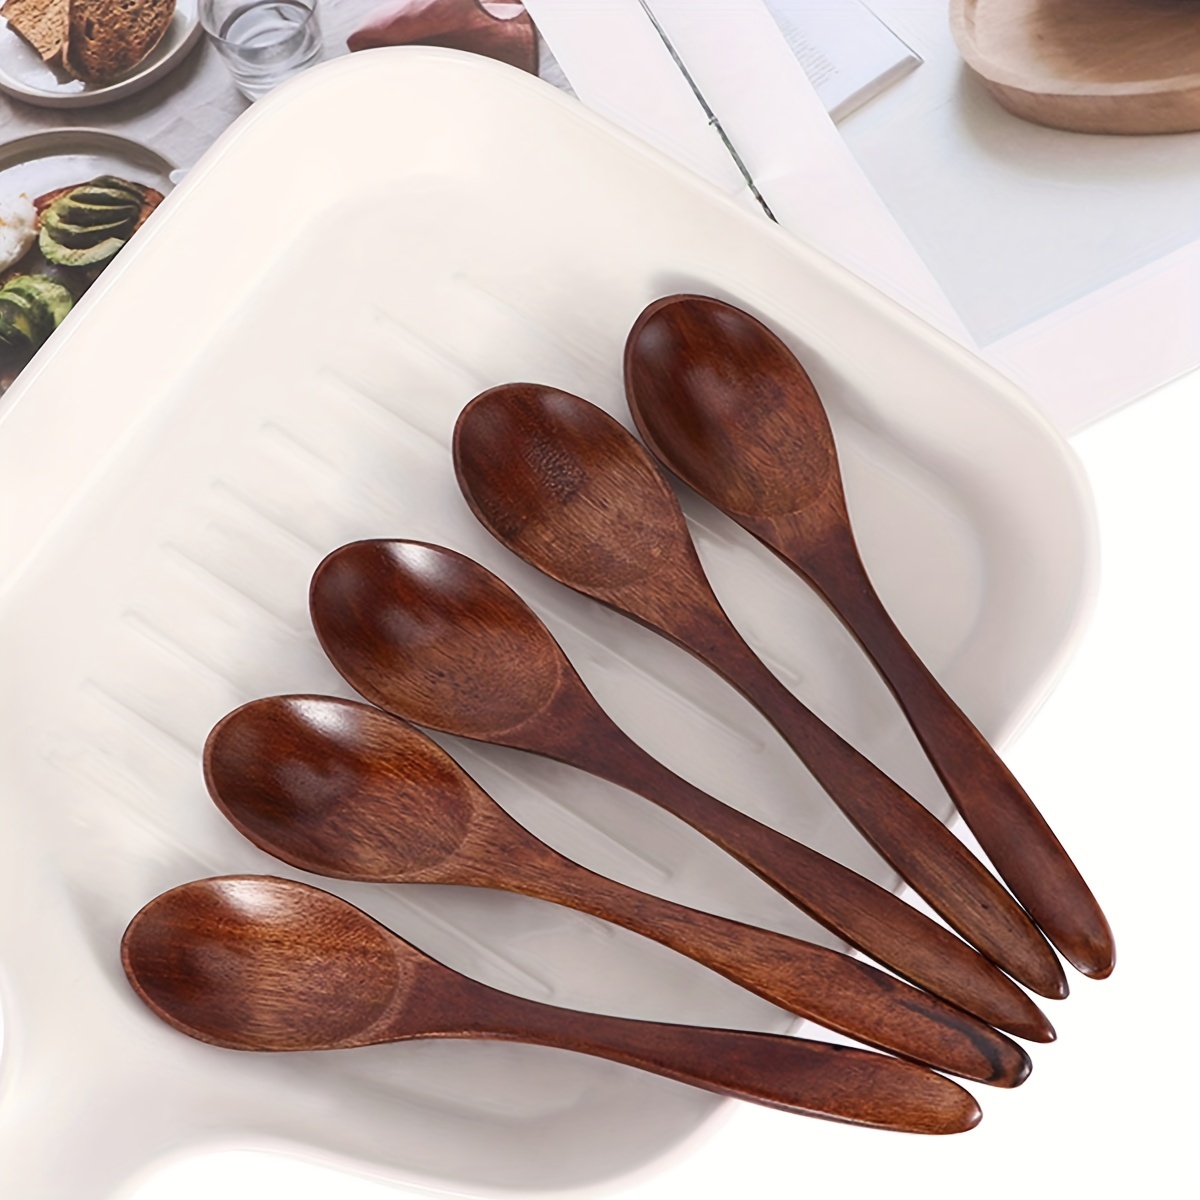 

5pcs, Reusable Wooden Coffee, Honey, Milk, And Yogurt Spoons - Creative Stirring And Dessert Spoons For Parties, Kitchens, And Restaurants